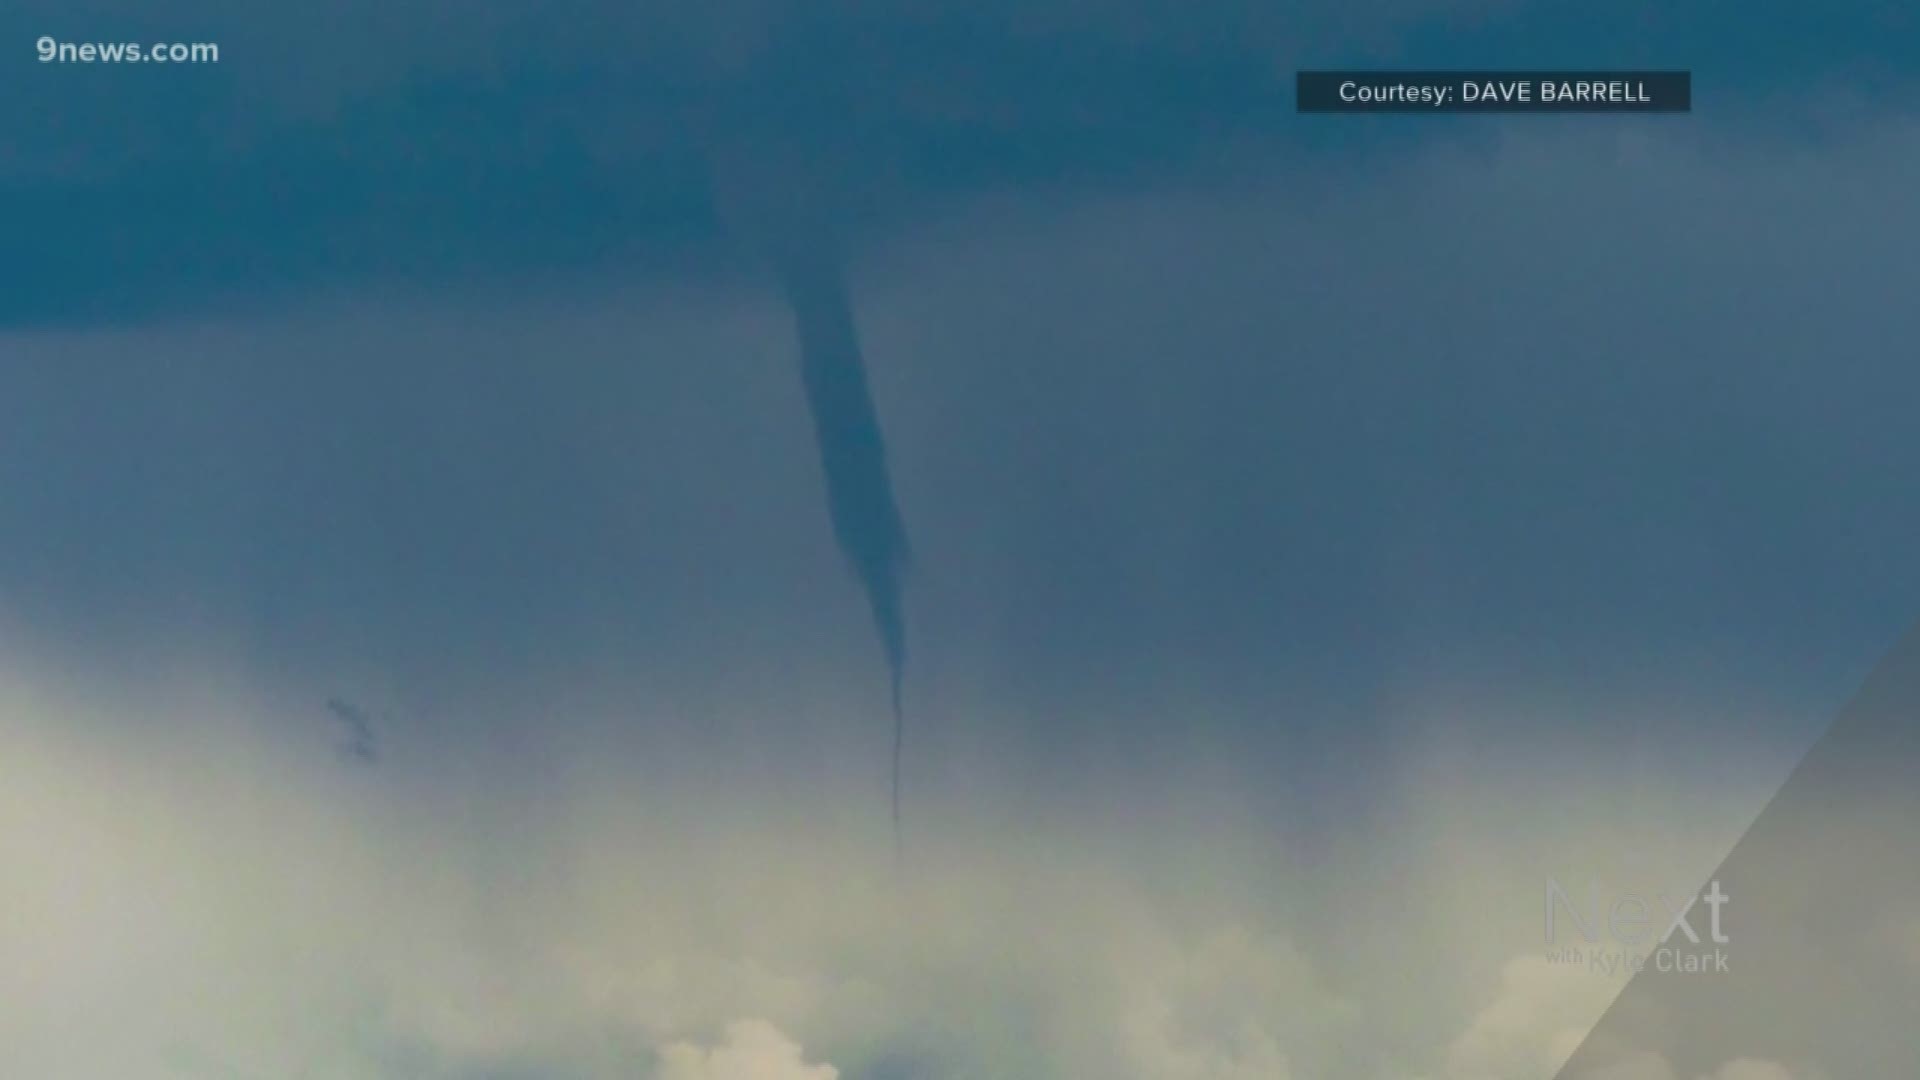 Here S Why Tornado Sirens Were Heard Sunday When There Was No Tornado Warning 9news Com